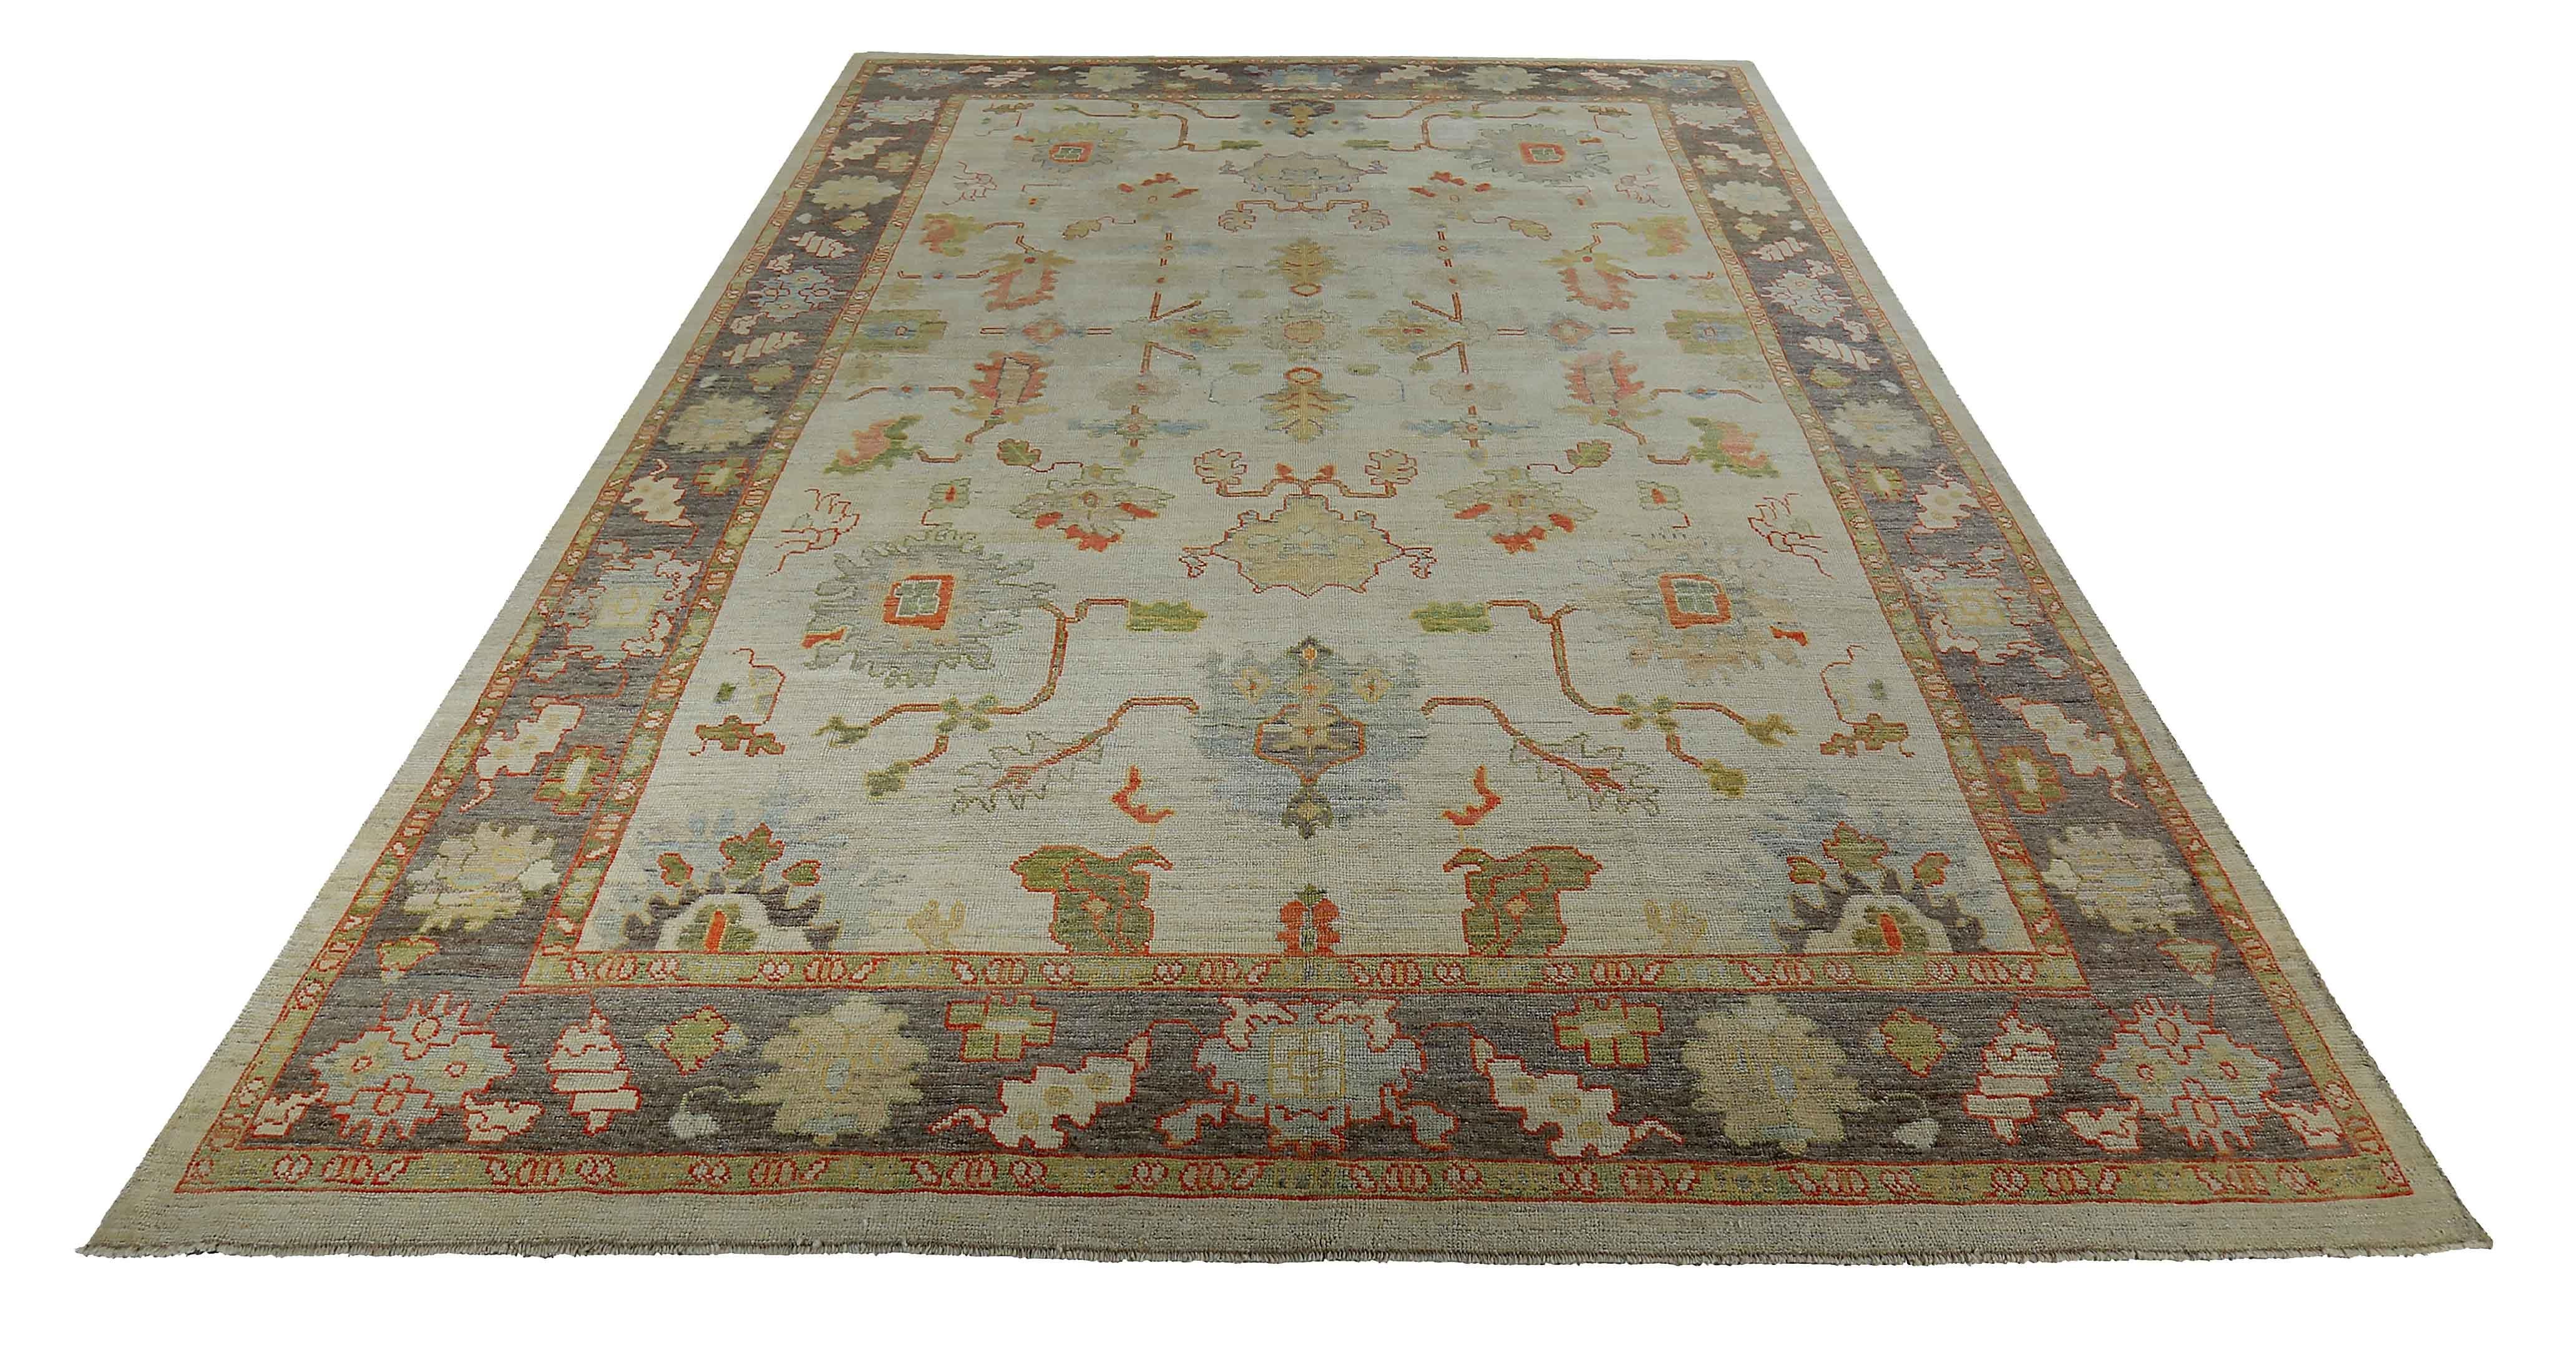 New Turkish rug made of handwoven sheep’s wool of the finest quality. It’s colored with organic vegetable dyes that are certified safe for humans and pets alike. It features green and red floral details on an ivory field. Flower patterns are